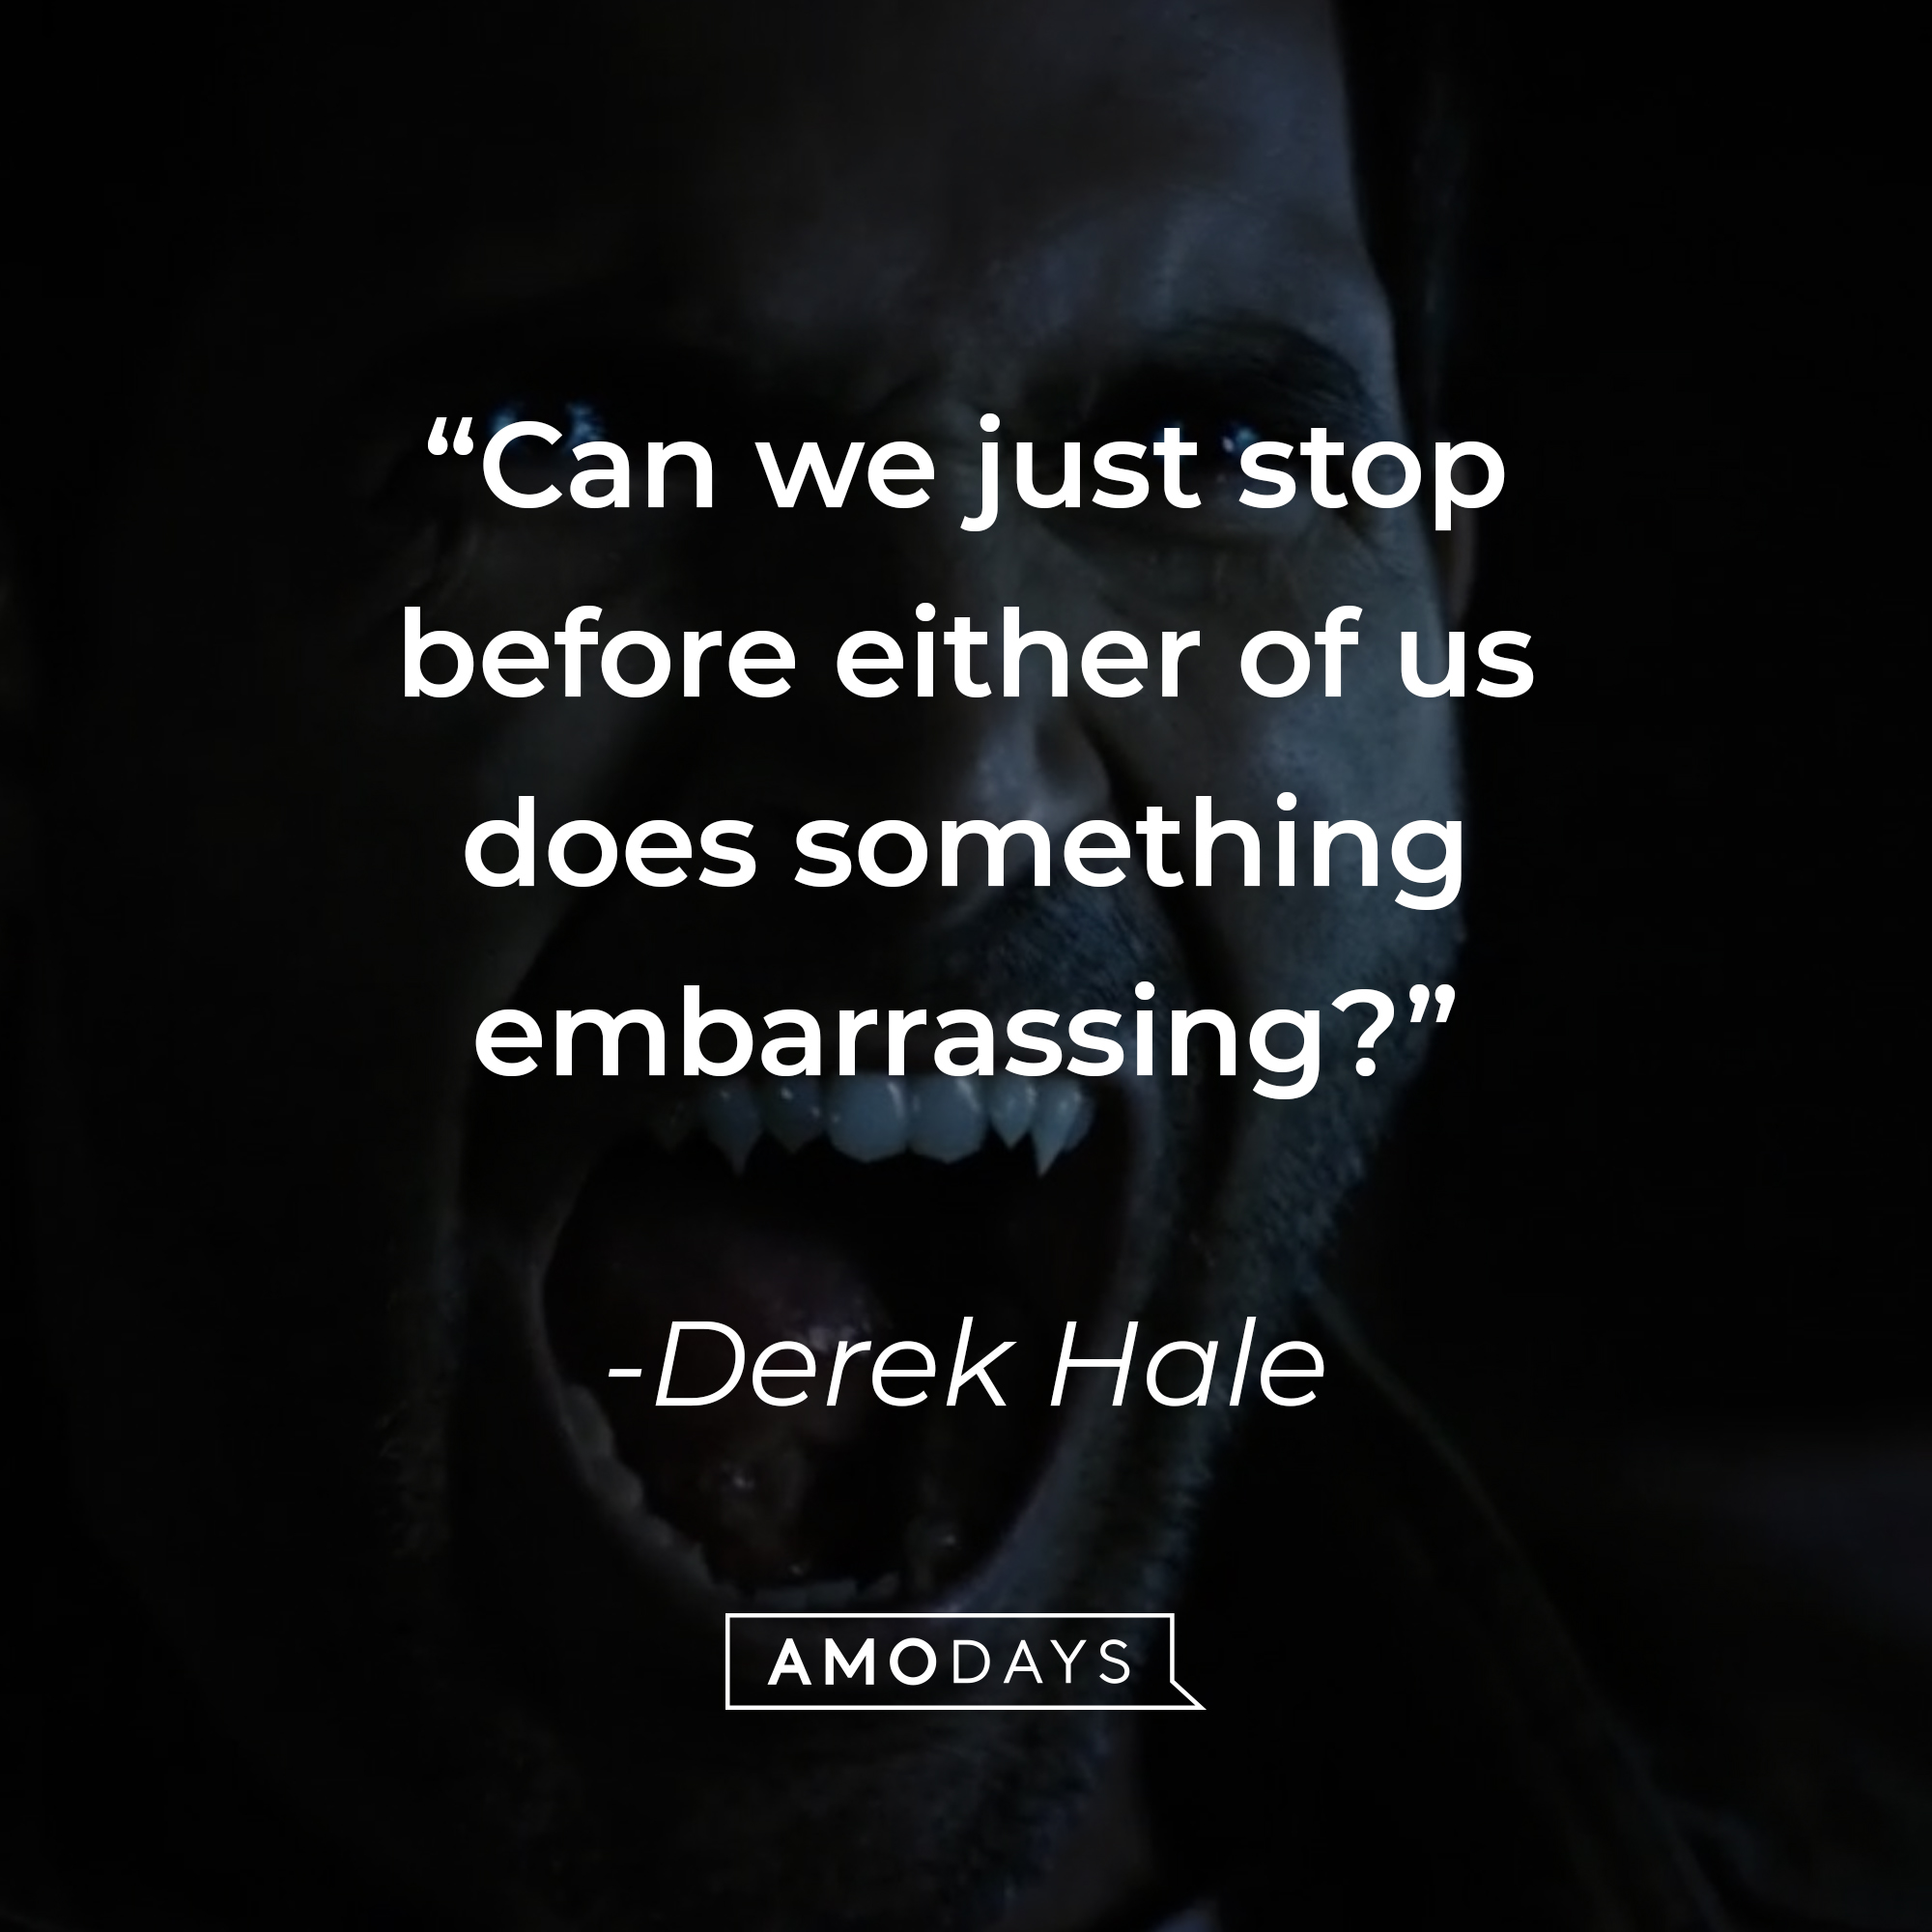 Derek Hale, with his quote: “Can we just stop before either of us does something embarrassing?” | Source: Amodays